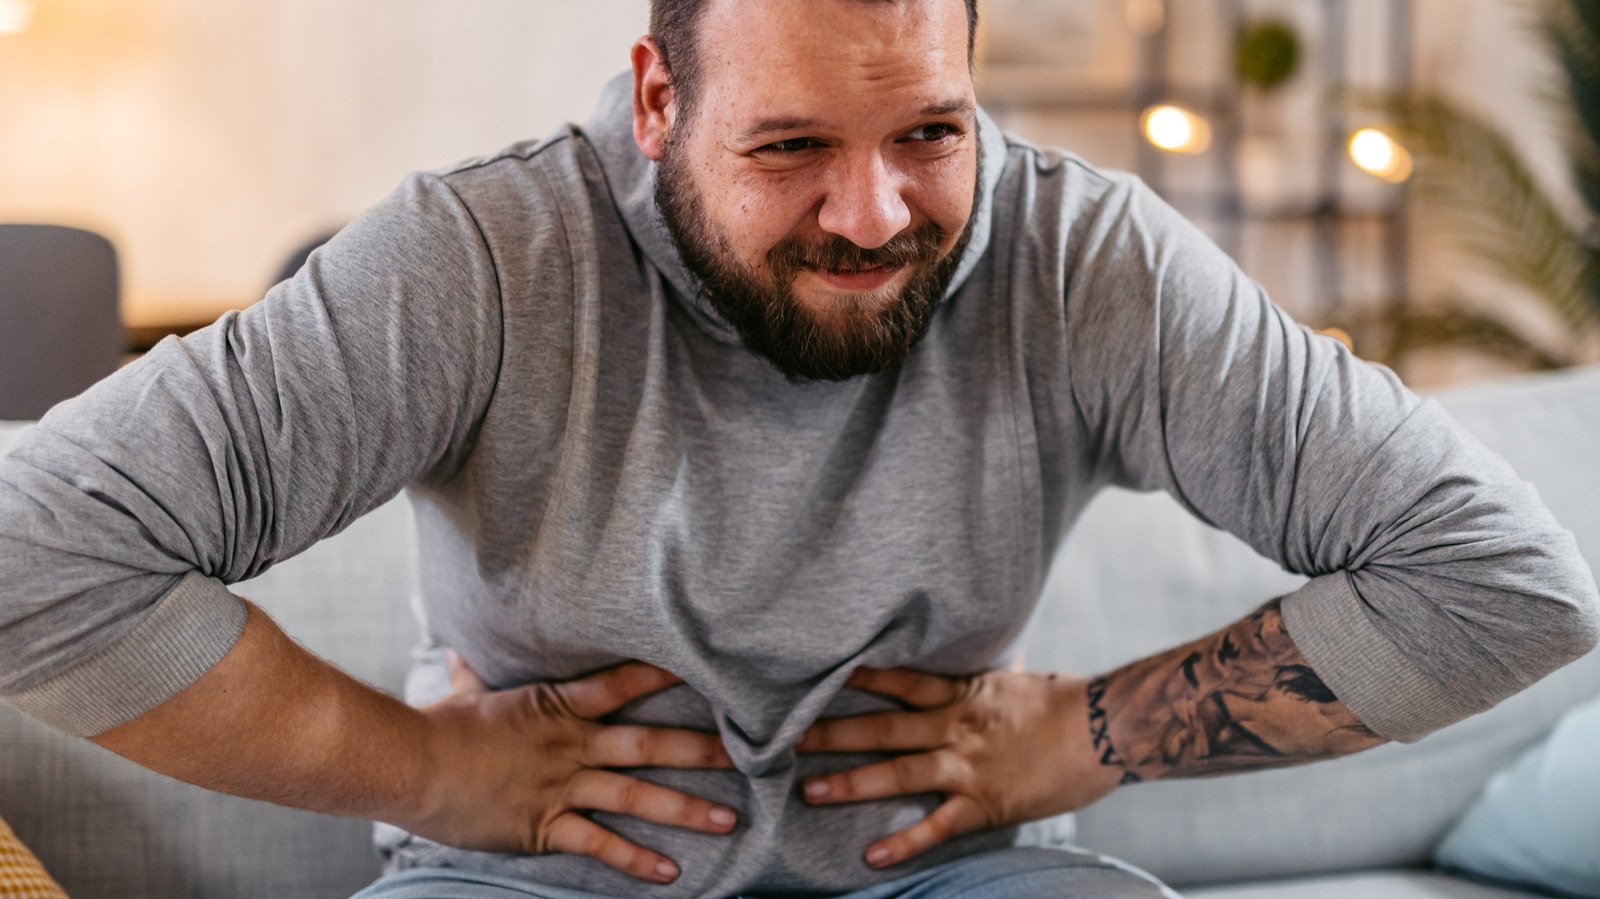 Common Medications That Can Cause Constipation - Health Digest